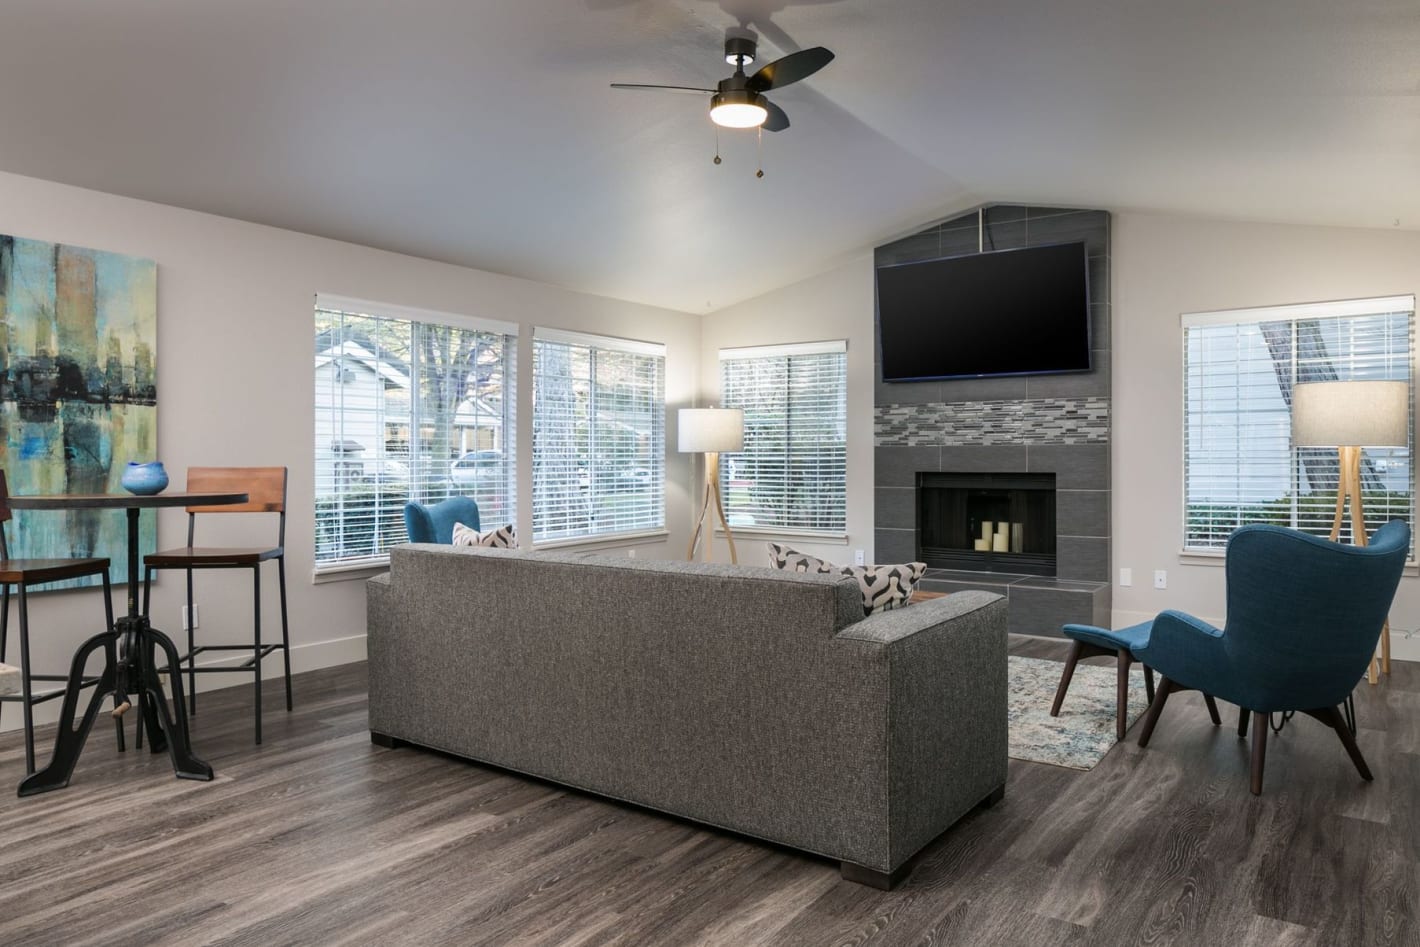 Photos and Video of Silver Oak Apartments in Mountlake Terrace, WA